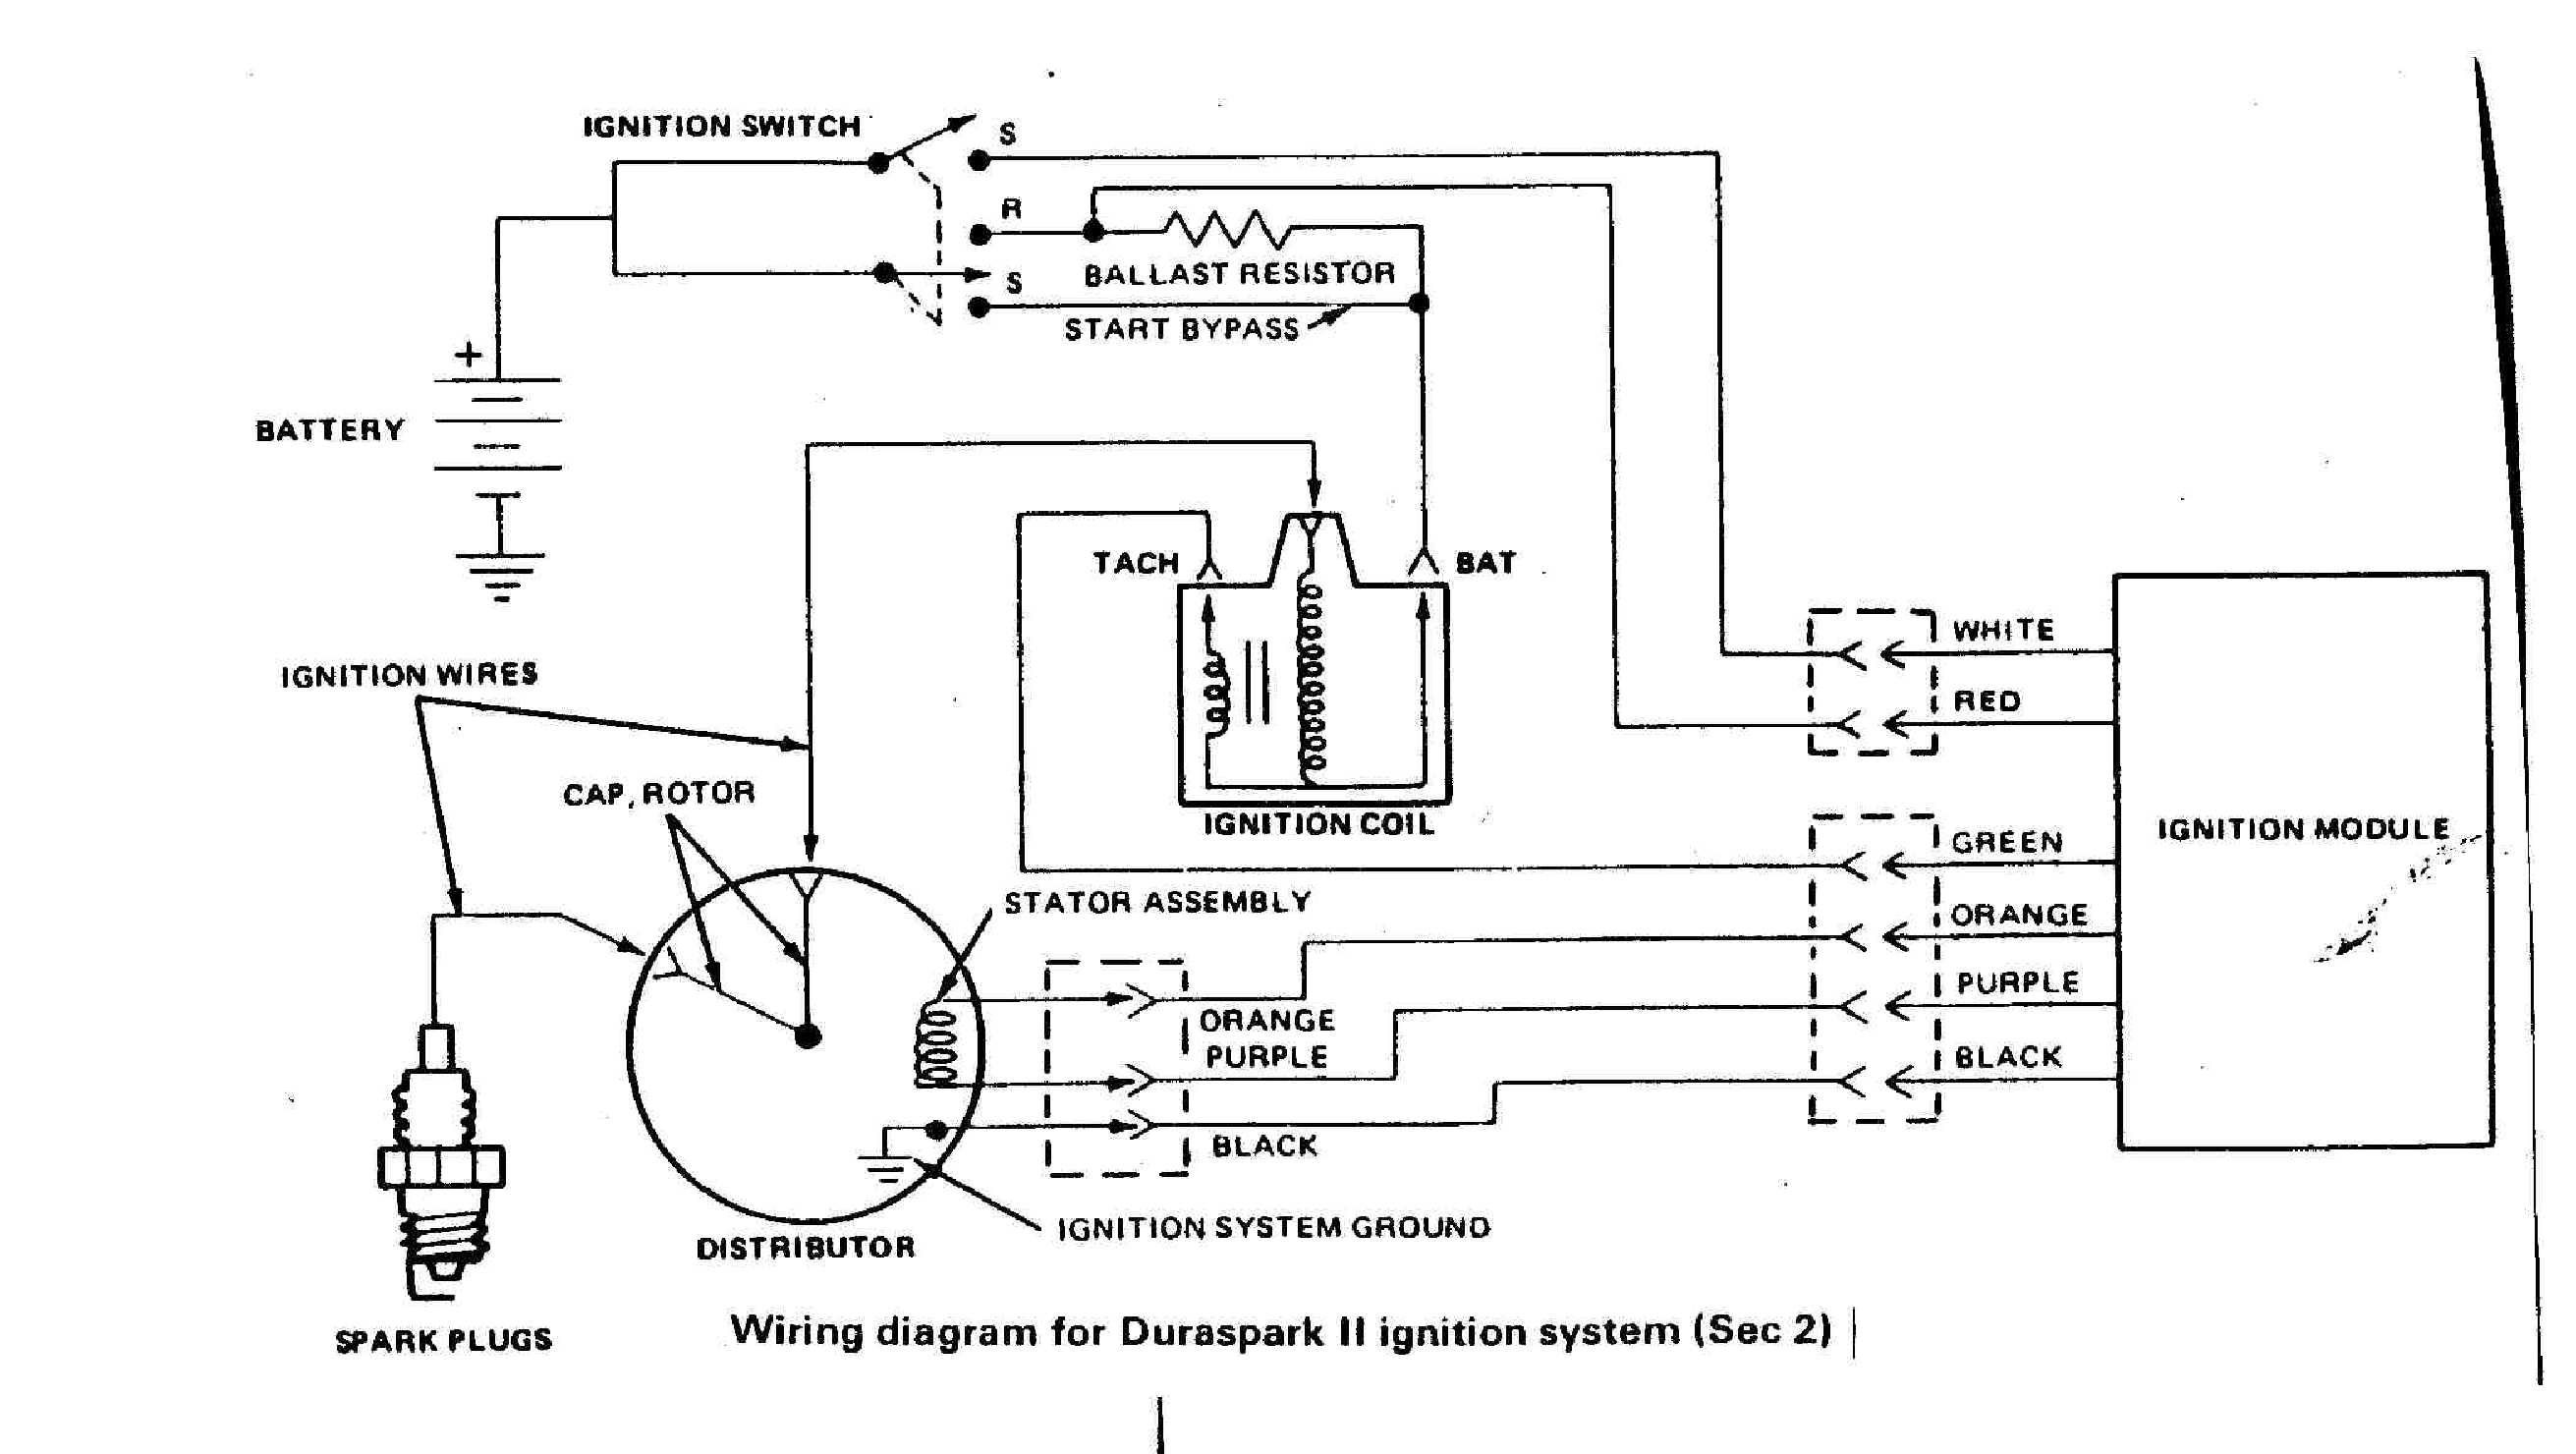 Evinrude Ignition Switch Wiring Diagram Ford Ignition System Wiring Harness Wiring Diagram Content